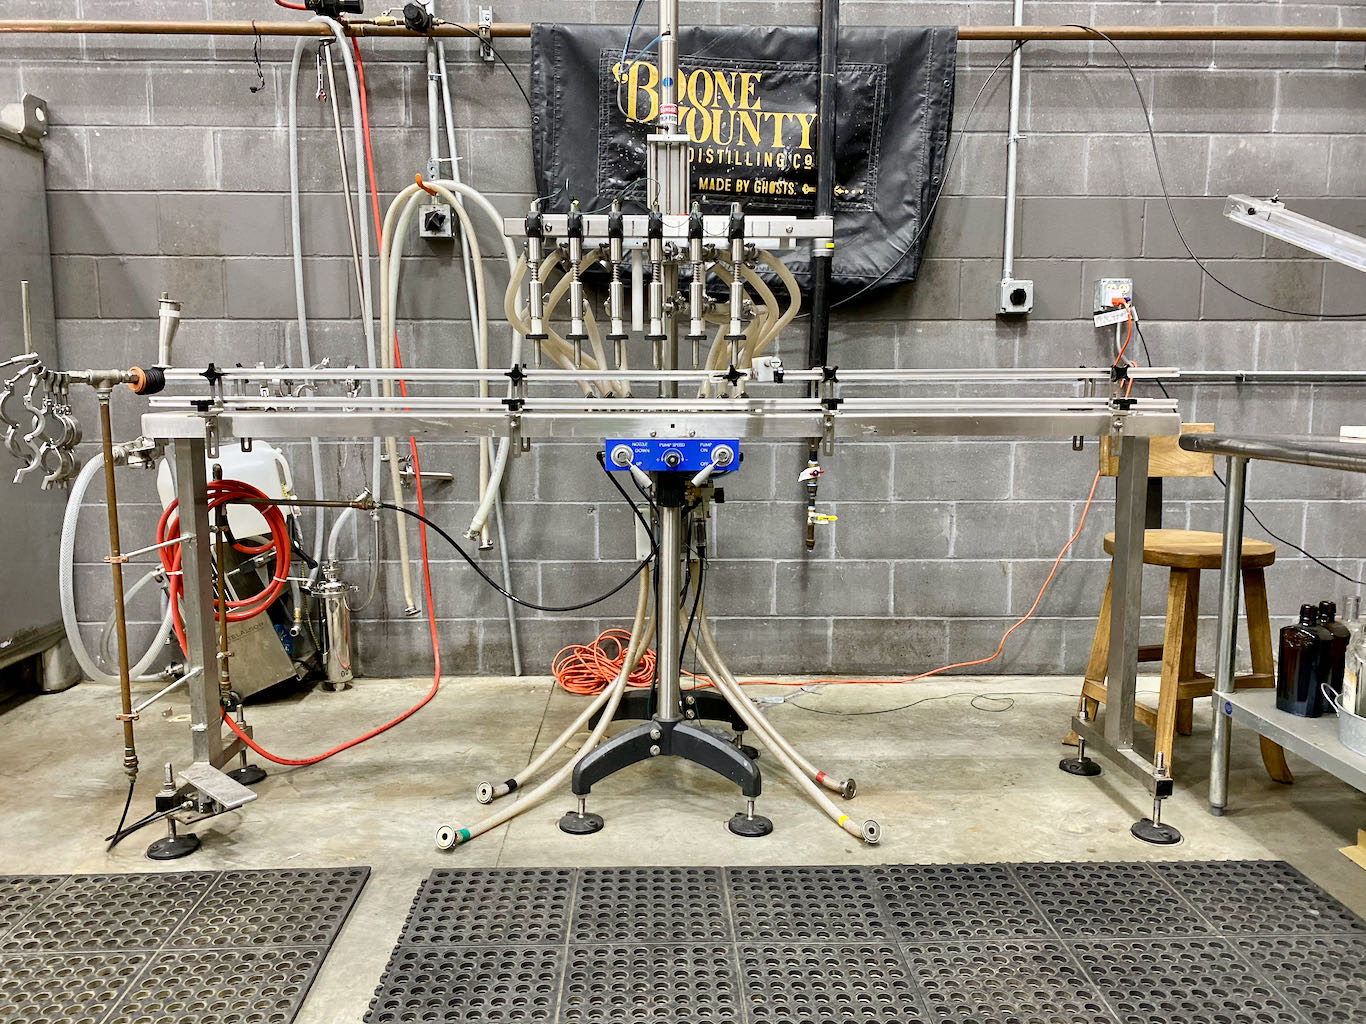 Bottling Line -Boone County Distilling Company